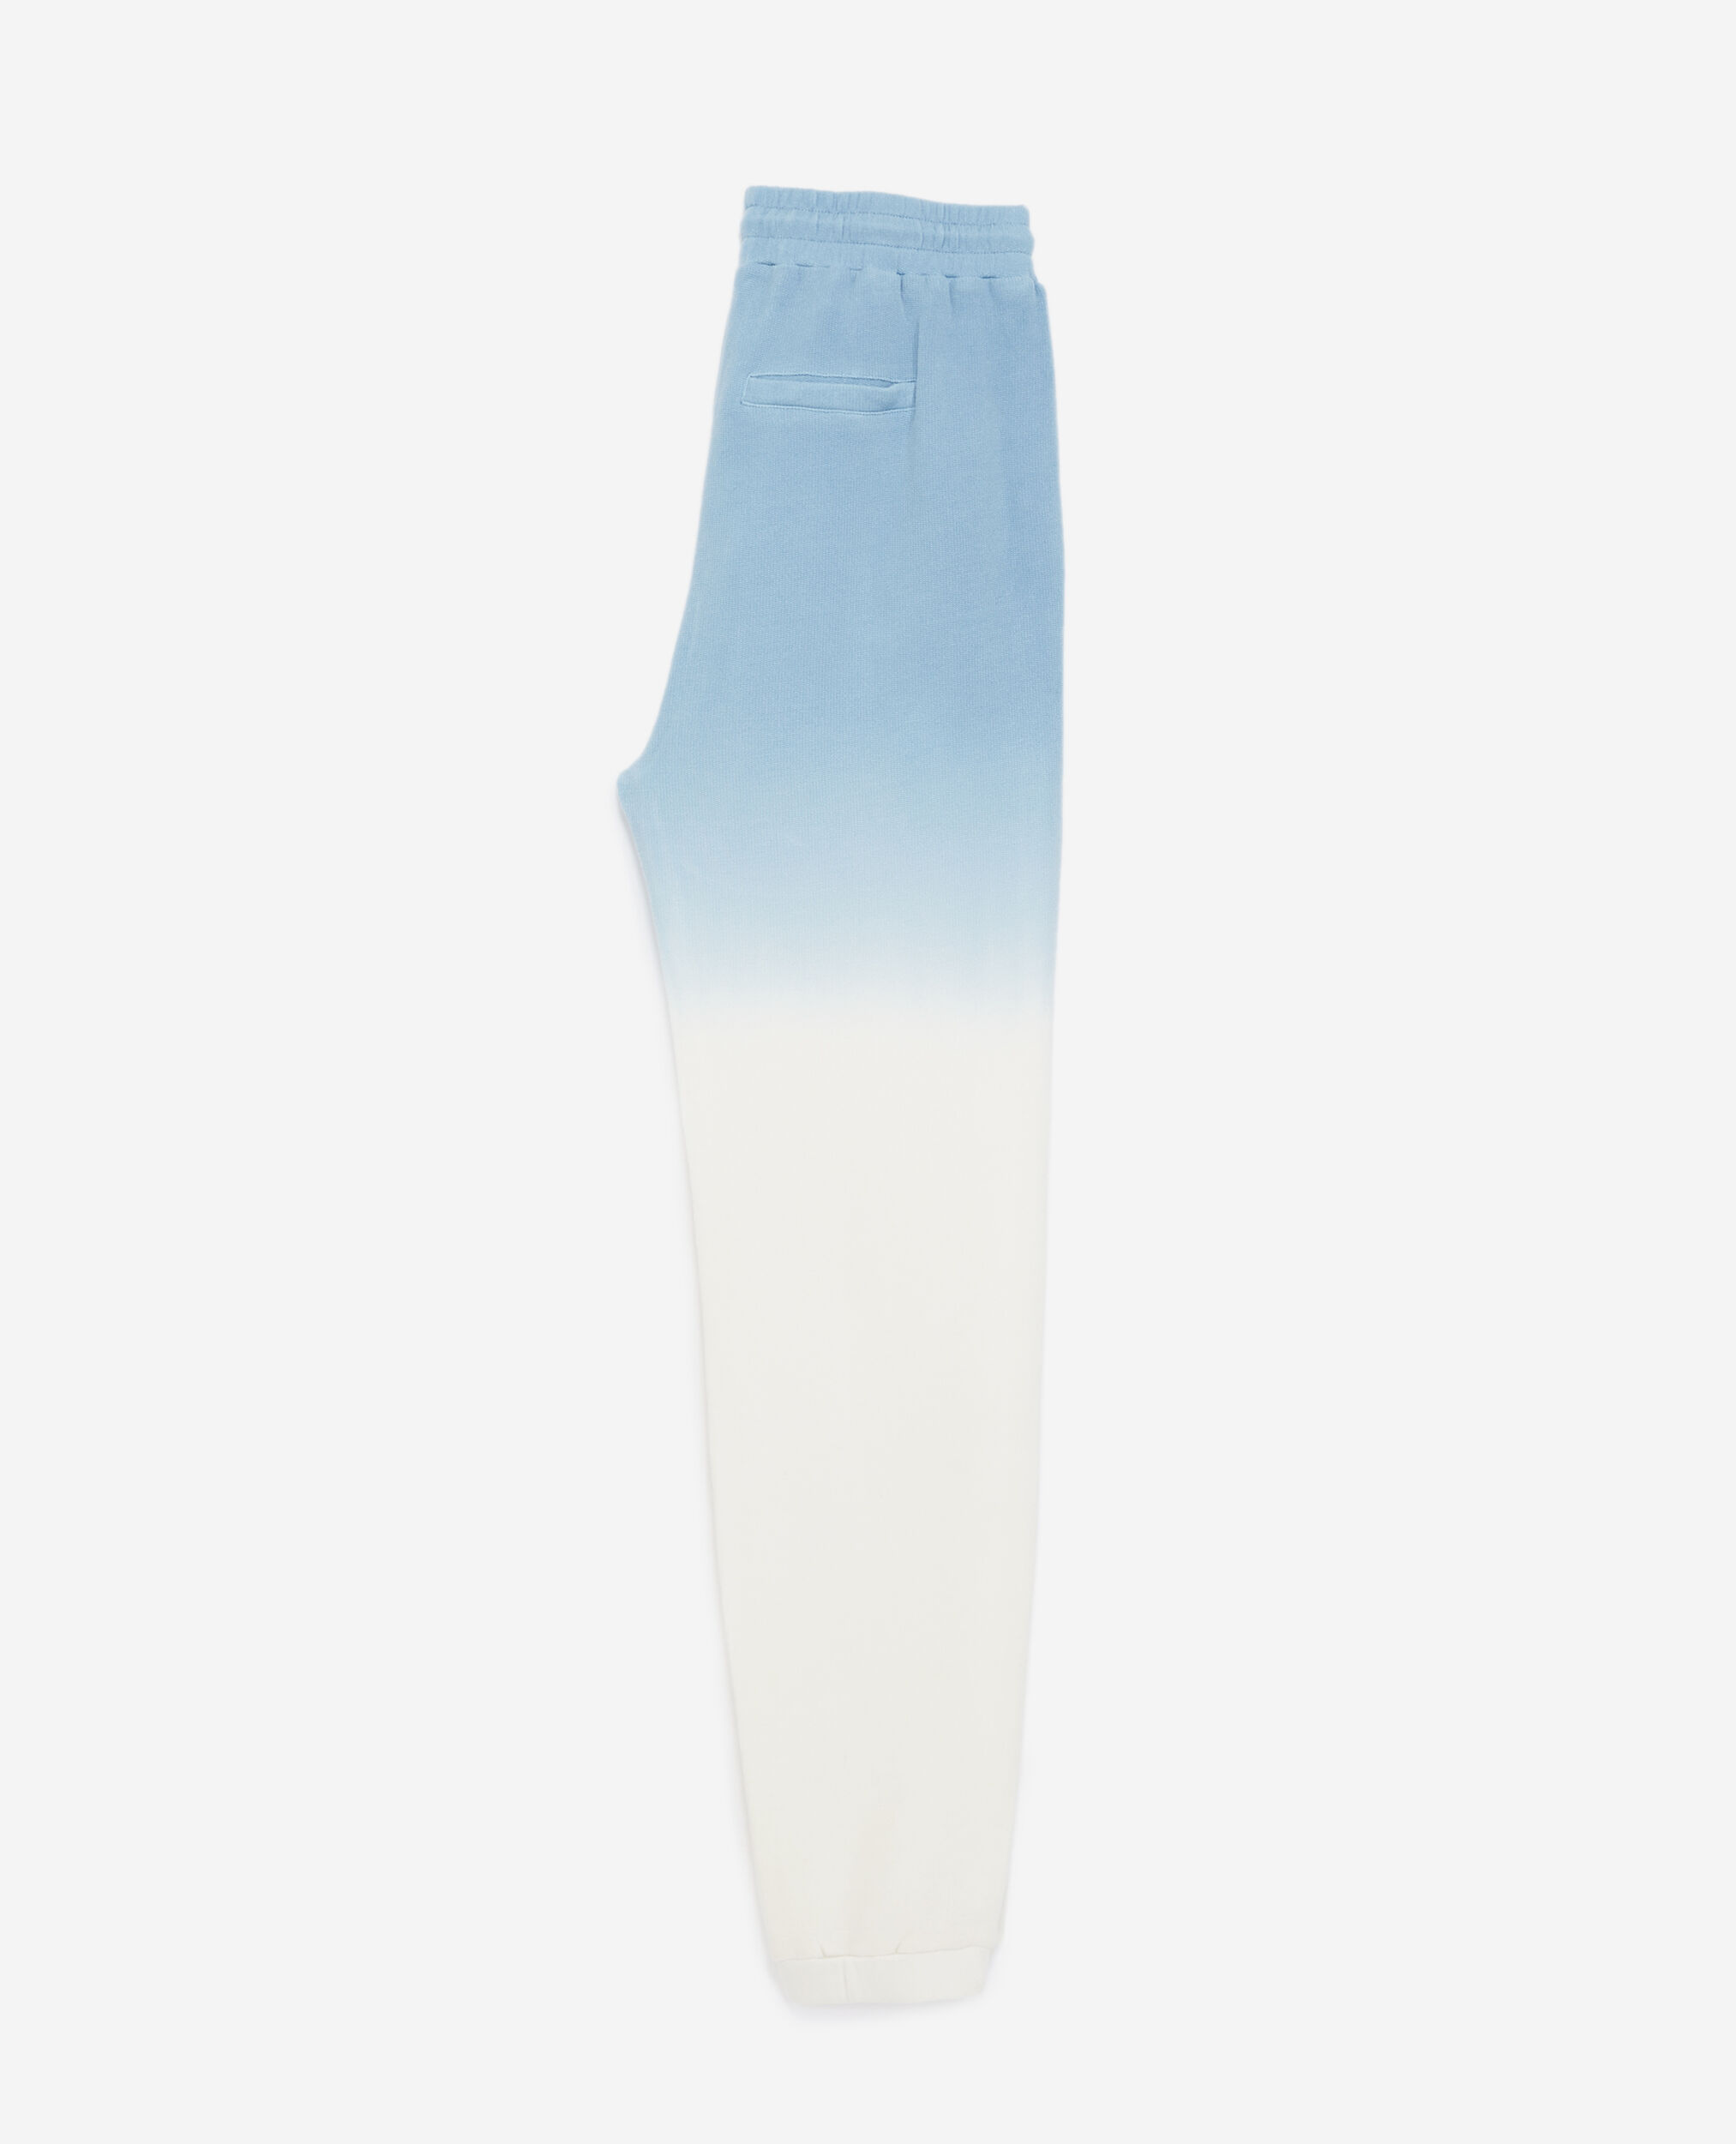 Blue and white joggers with tie-dye effect, BLUE WHITE, hi-res image number null